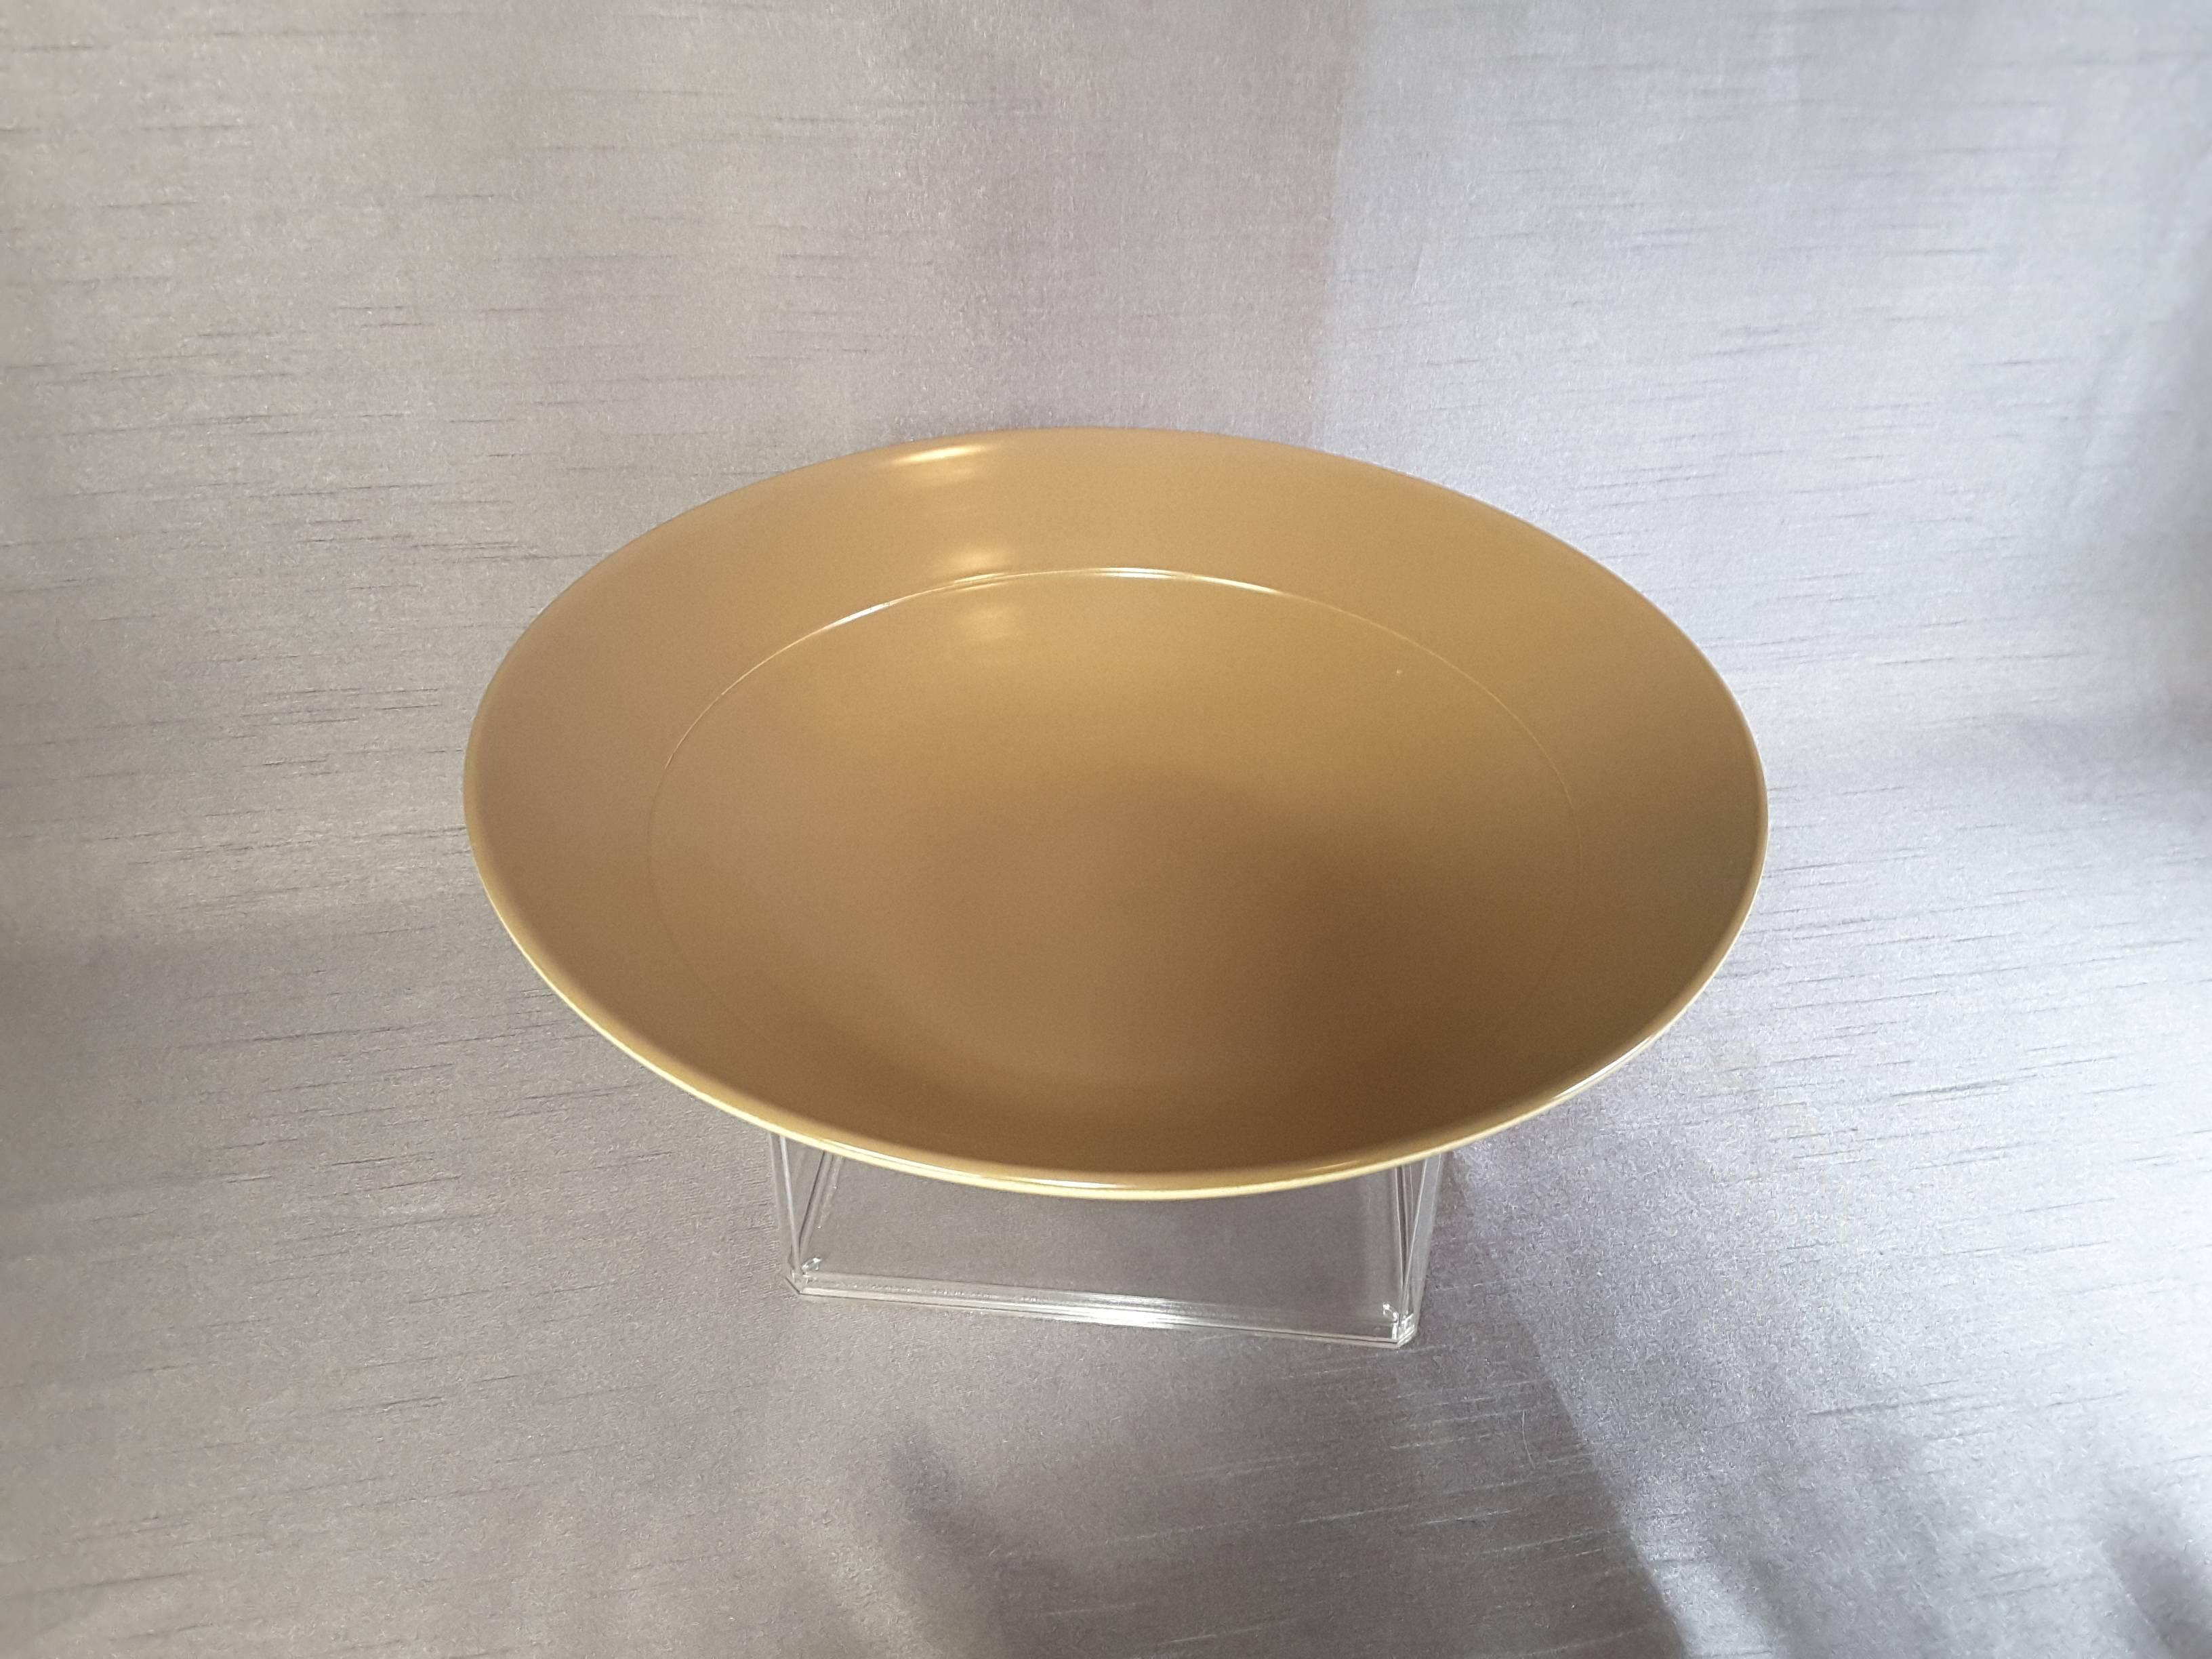 Mid-Century Poole pottery centrepiece bowl, fruit bowl or salad bowl, the bowl is done in a neutral beige earth tone, simplistic flared design with a single circular interior ring, even as a stand alone piece, it is nice. The bowl measures 14